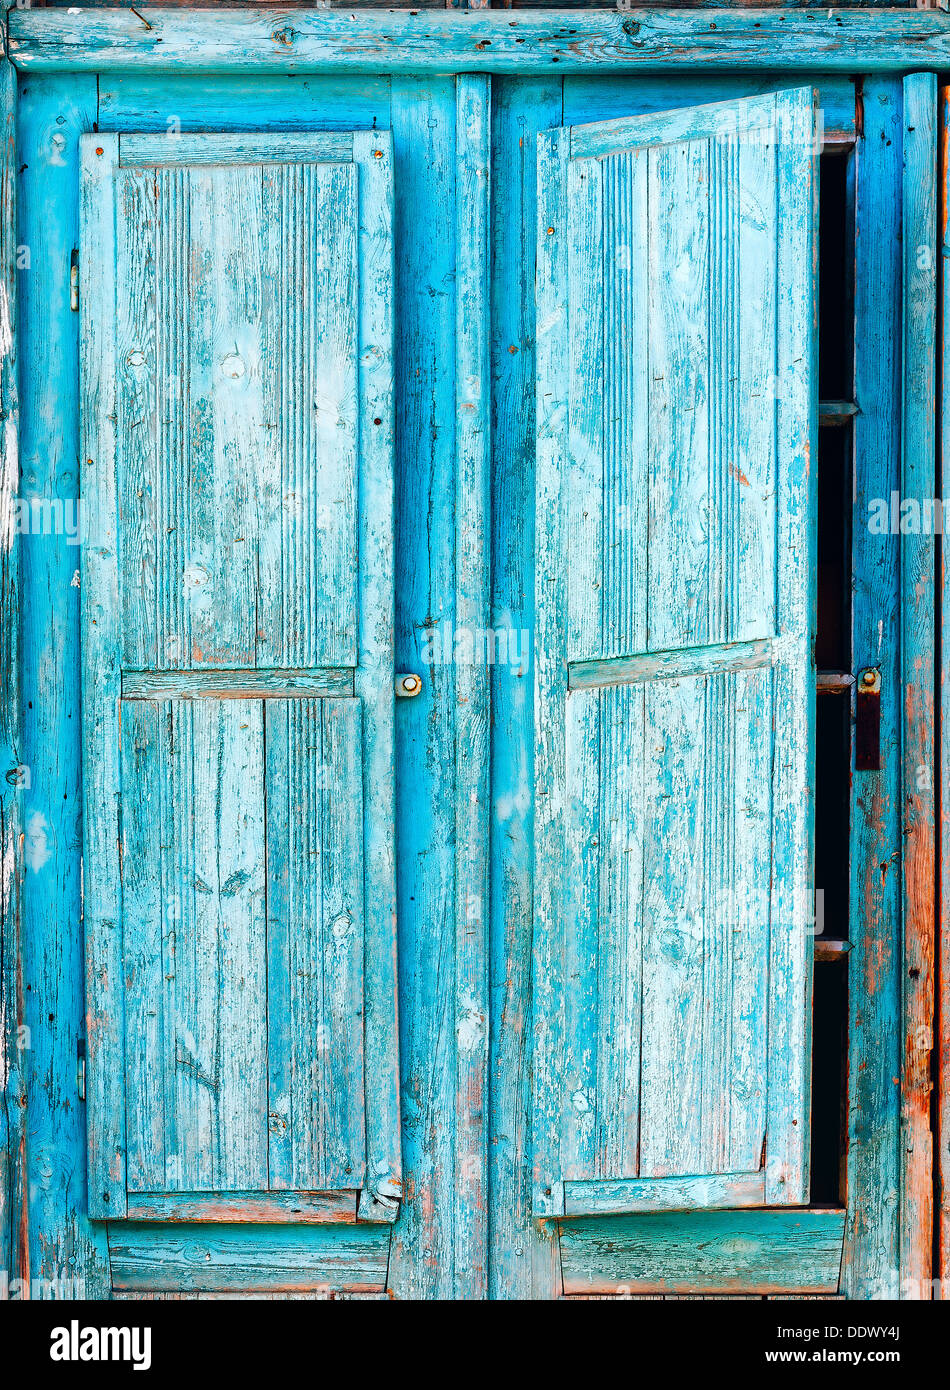 old blue wooden shutters Stock Photo